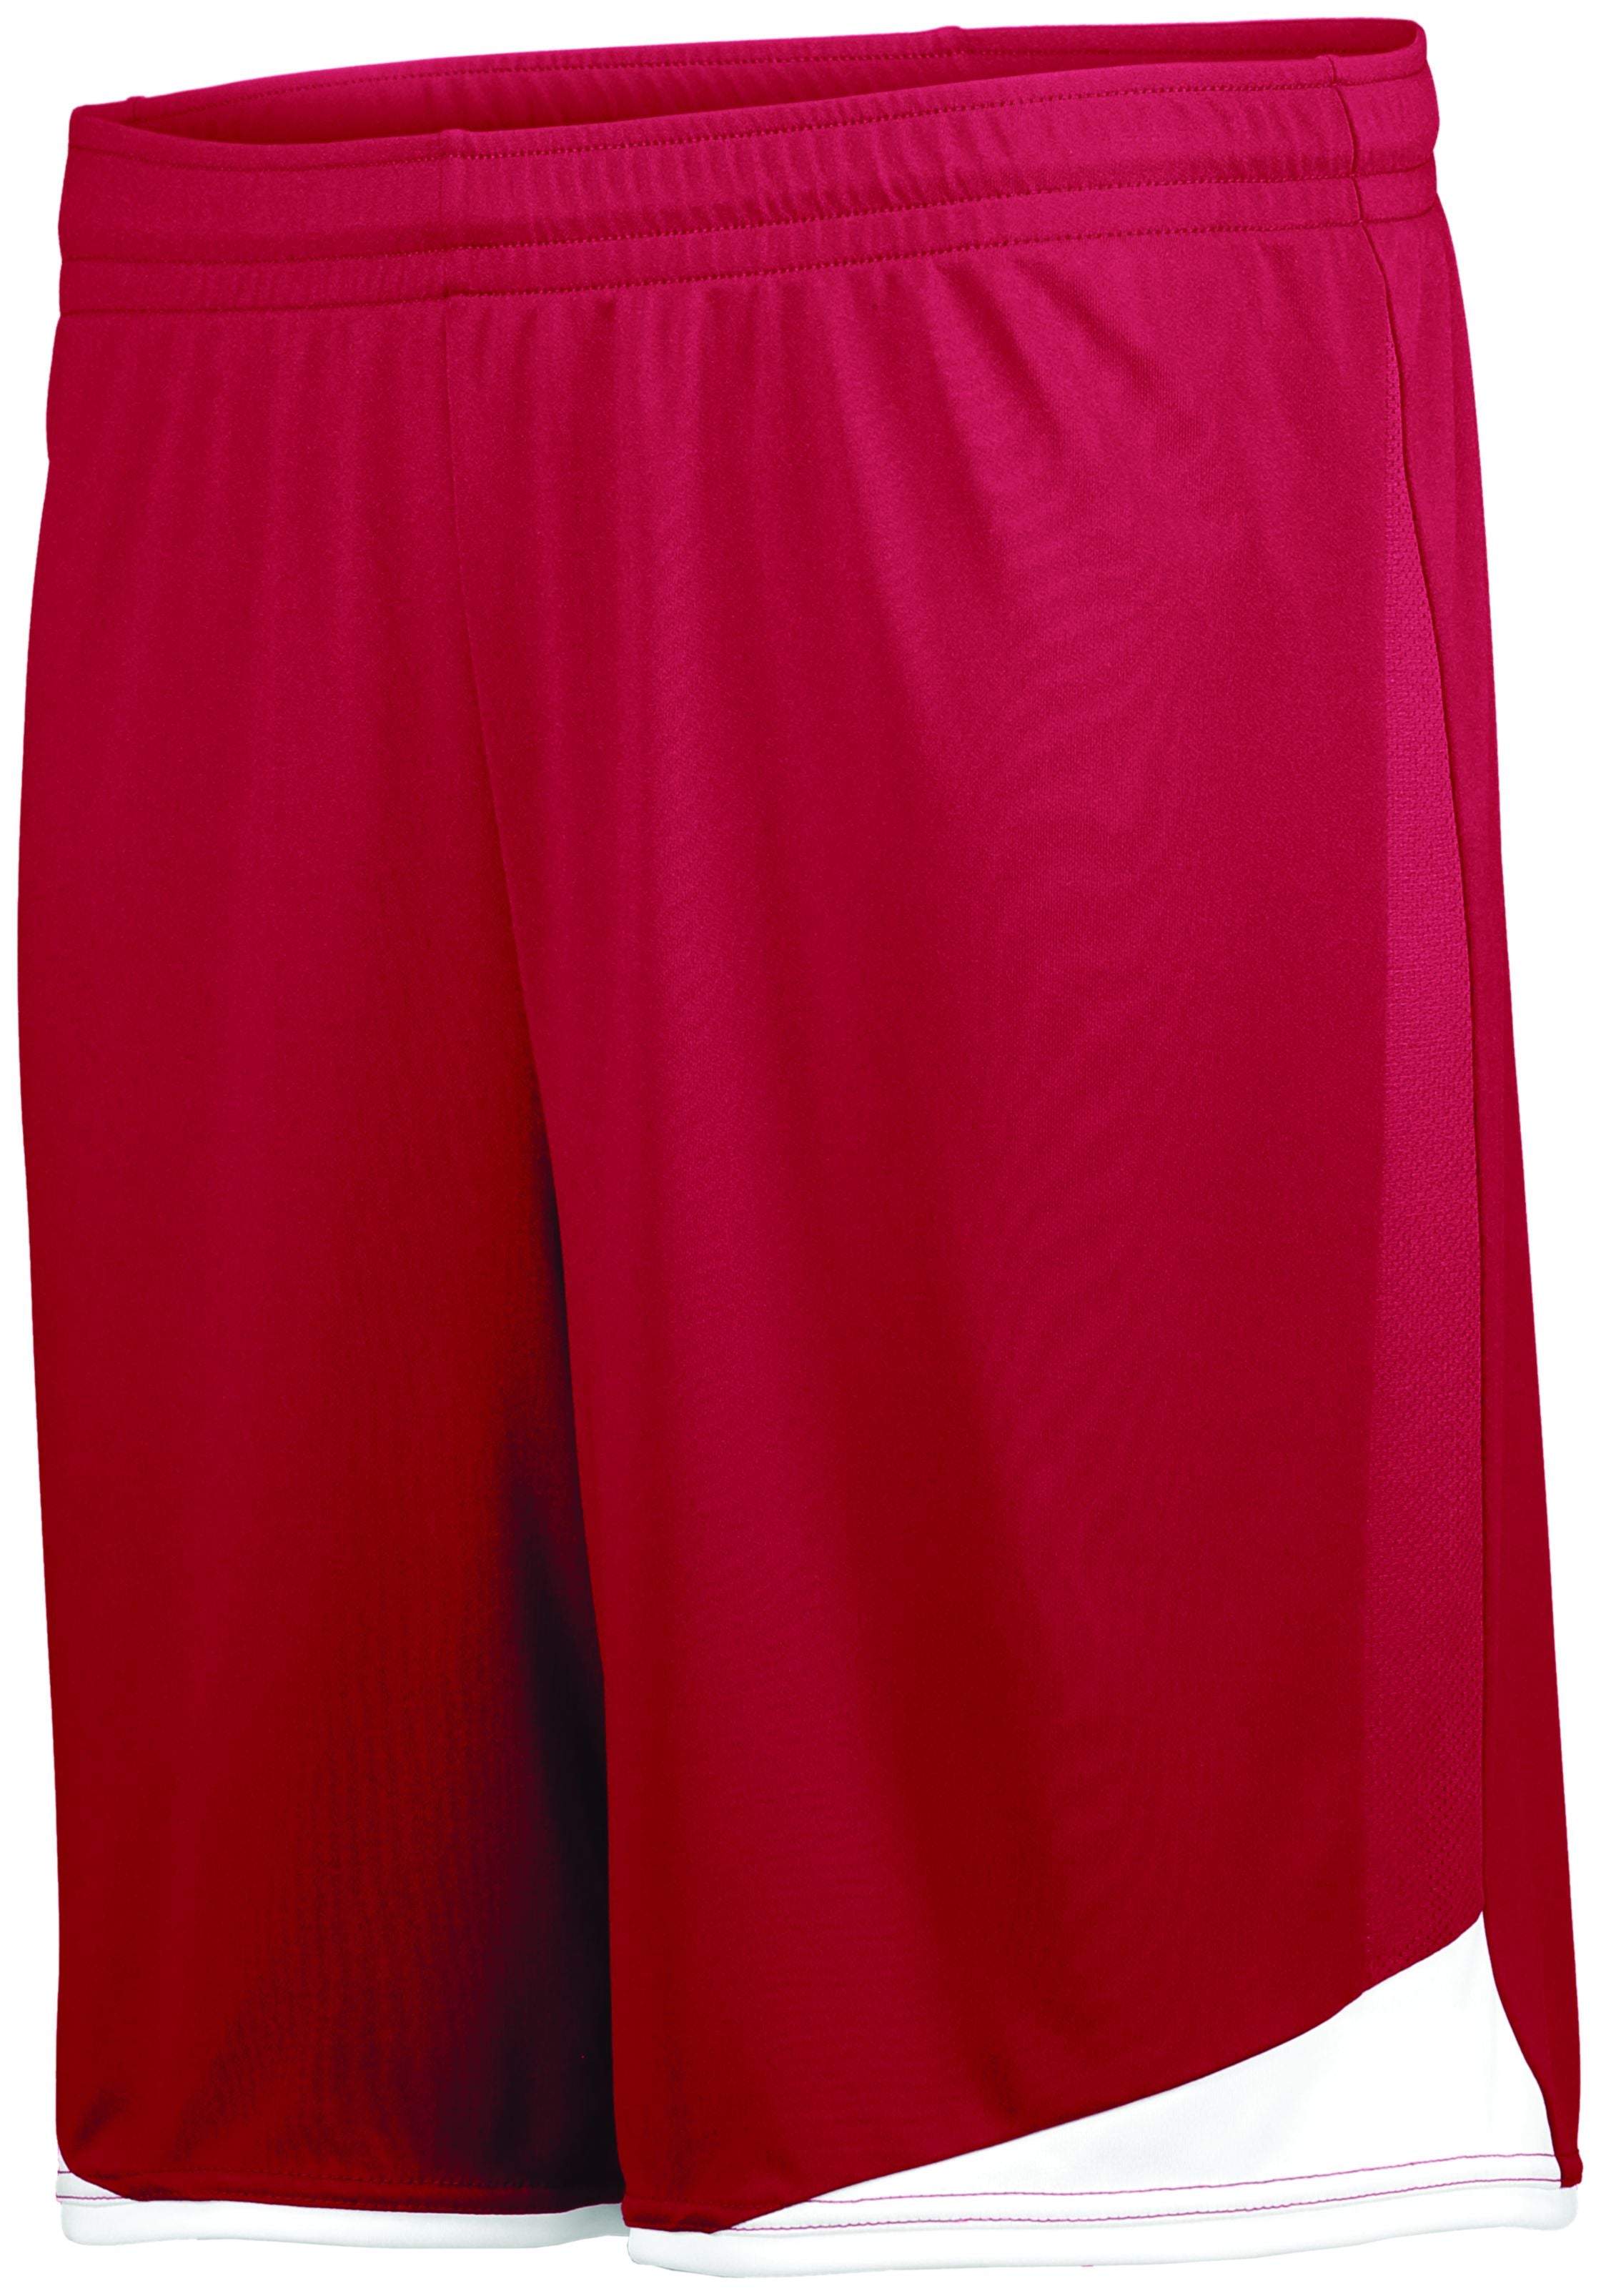 High 5 Stamford Soccer Shorts in Scarlet/White  -Part of the Adult, Adult-Shorts, High5-Products, Soccer, All-Sports-1 product lines at KanaleyCreations.com